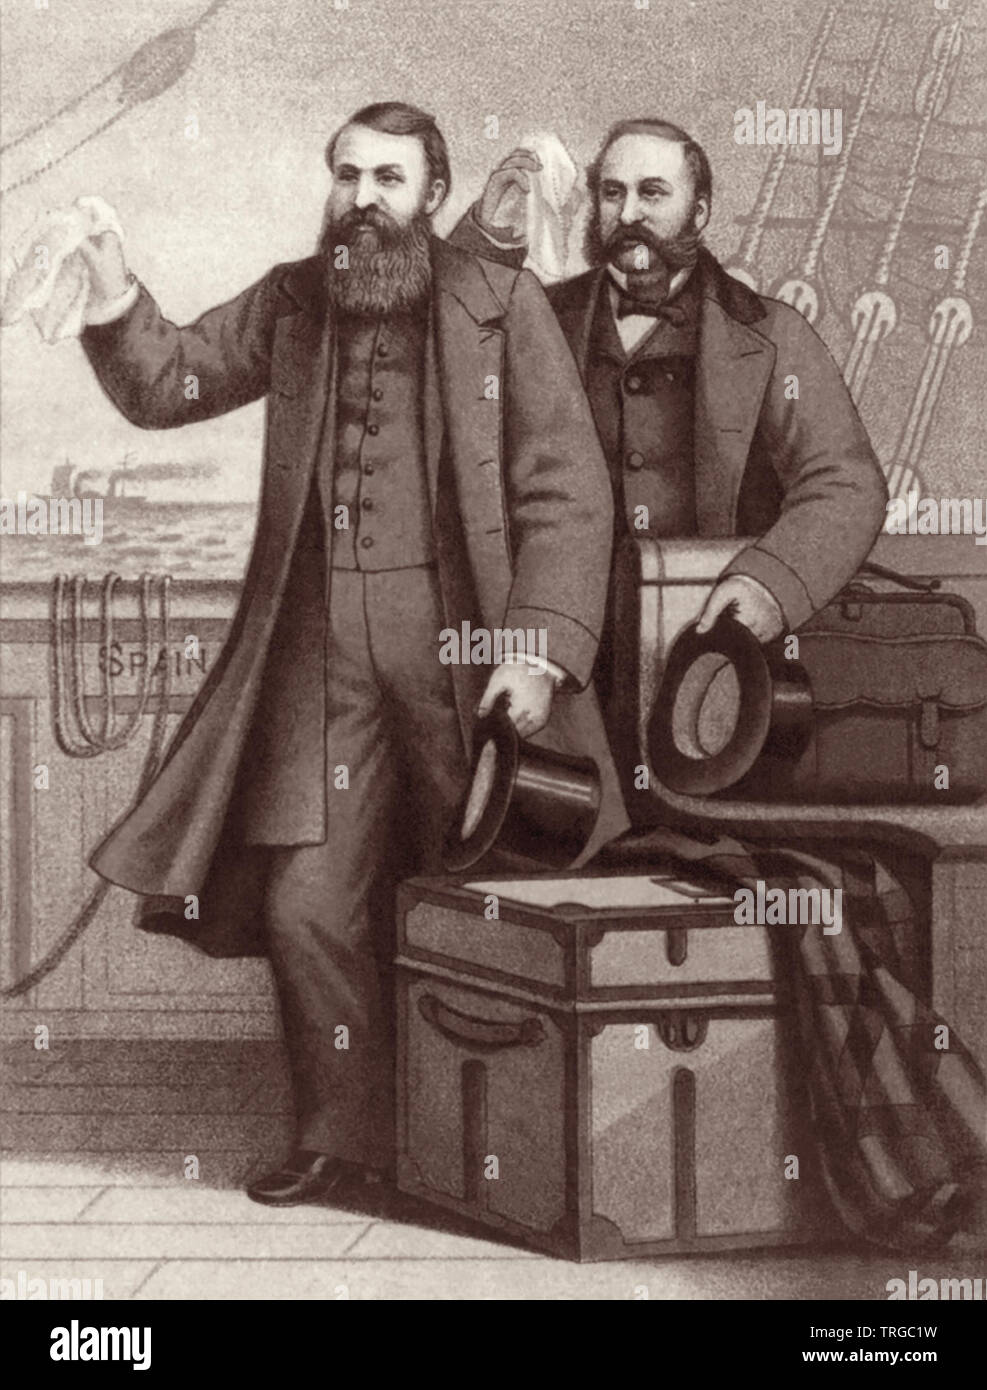 Lithograph illustration of 19th century American Christian evangelists D.L. Moody and Ira Sankey waving handkerchiefs from a ship in a farewell to England, c1877. Stock Photo